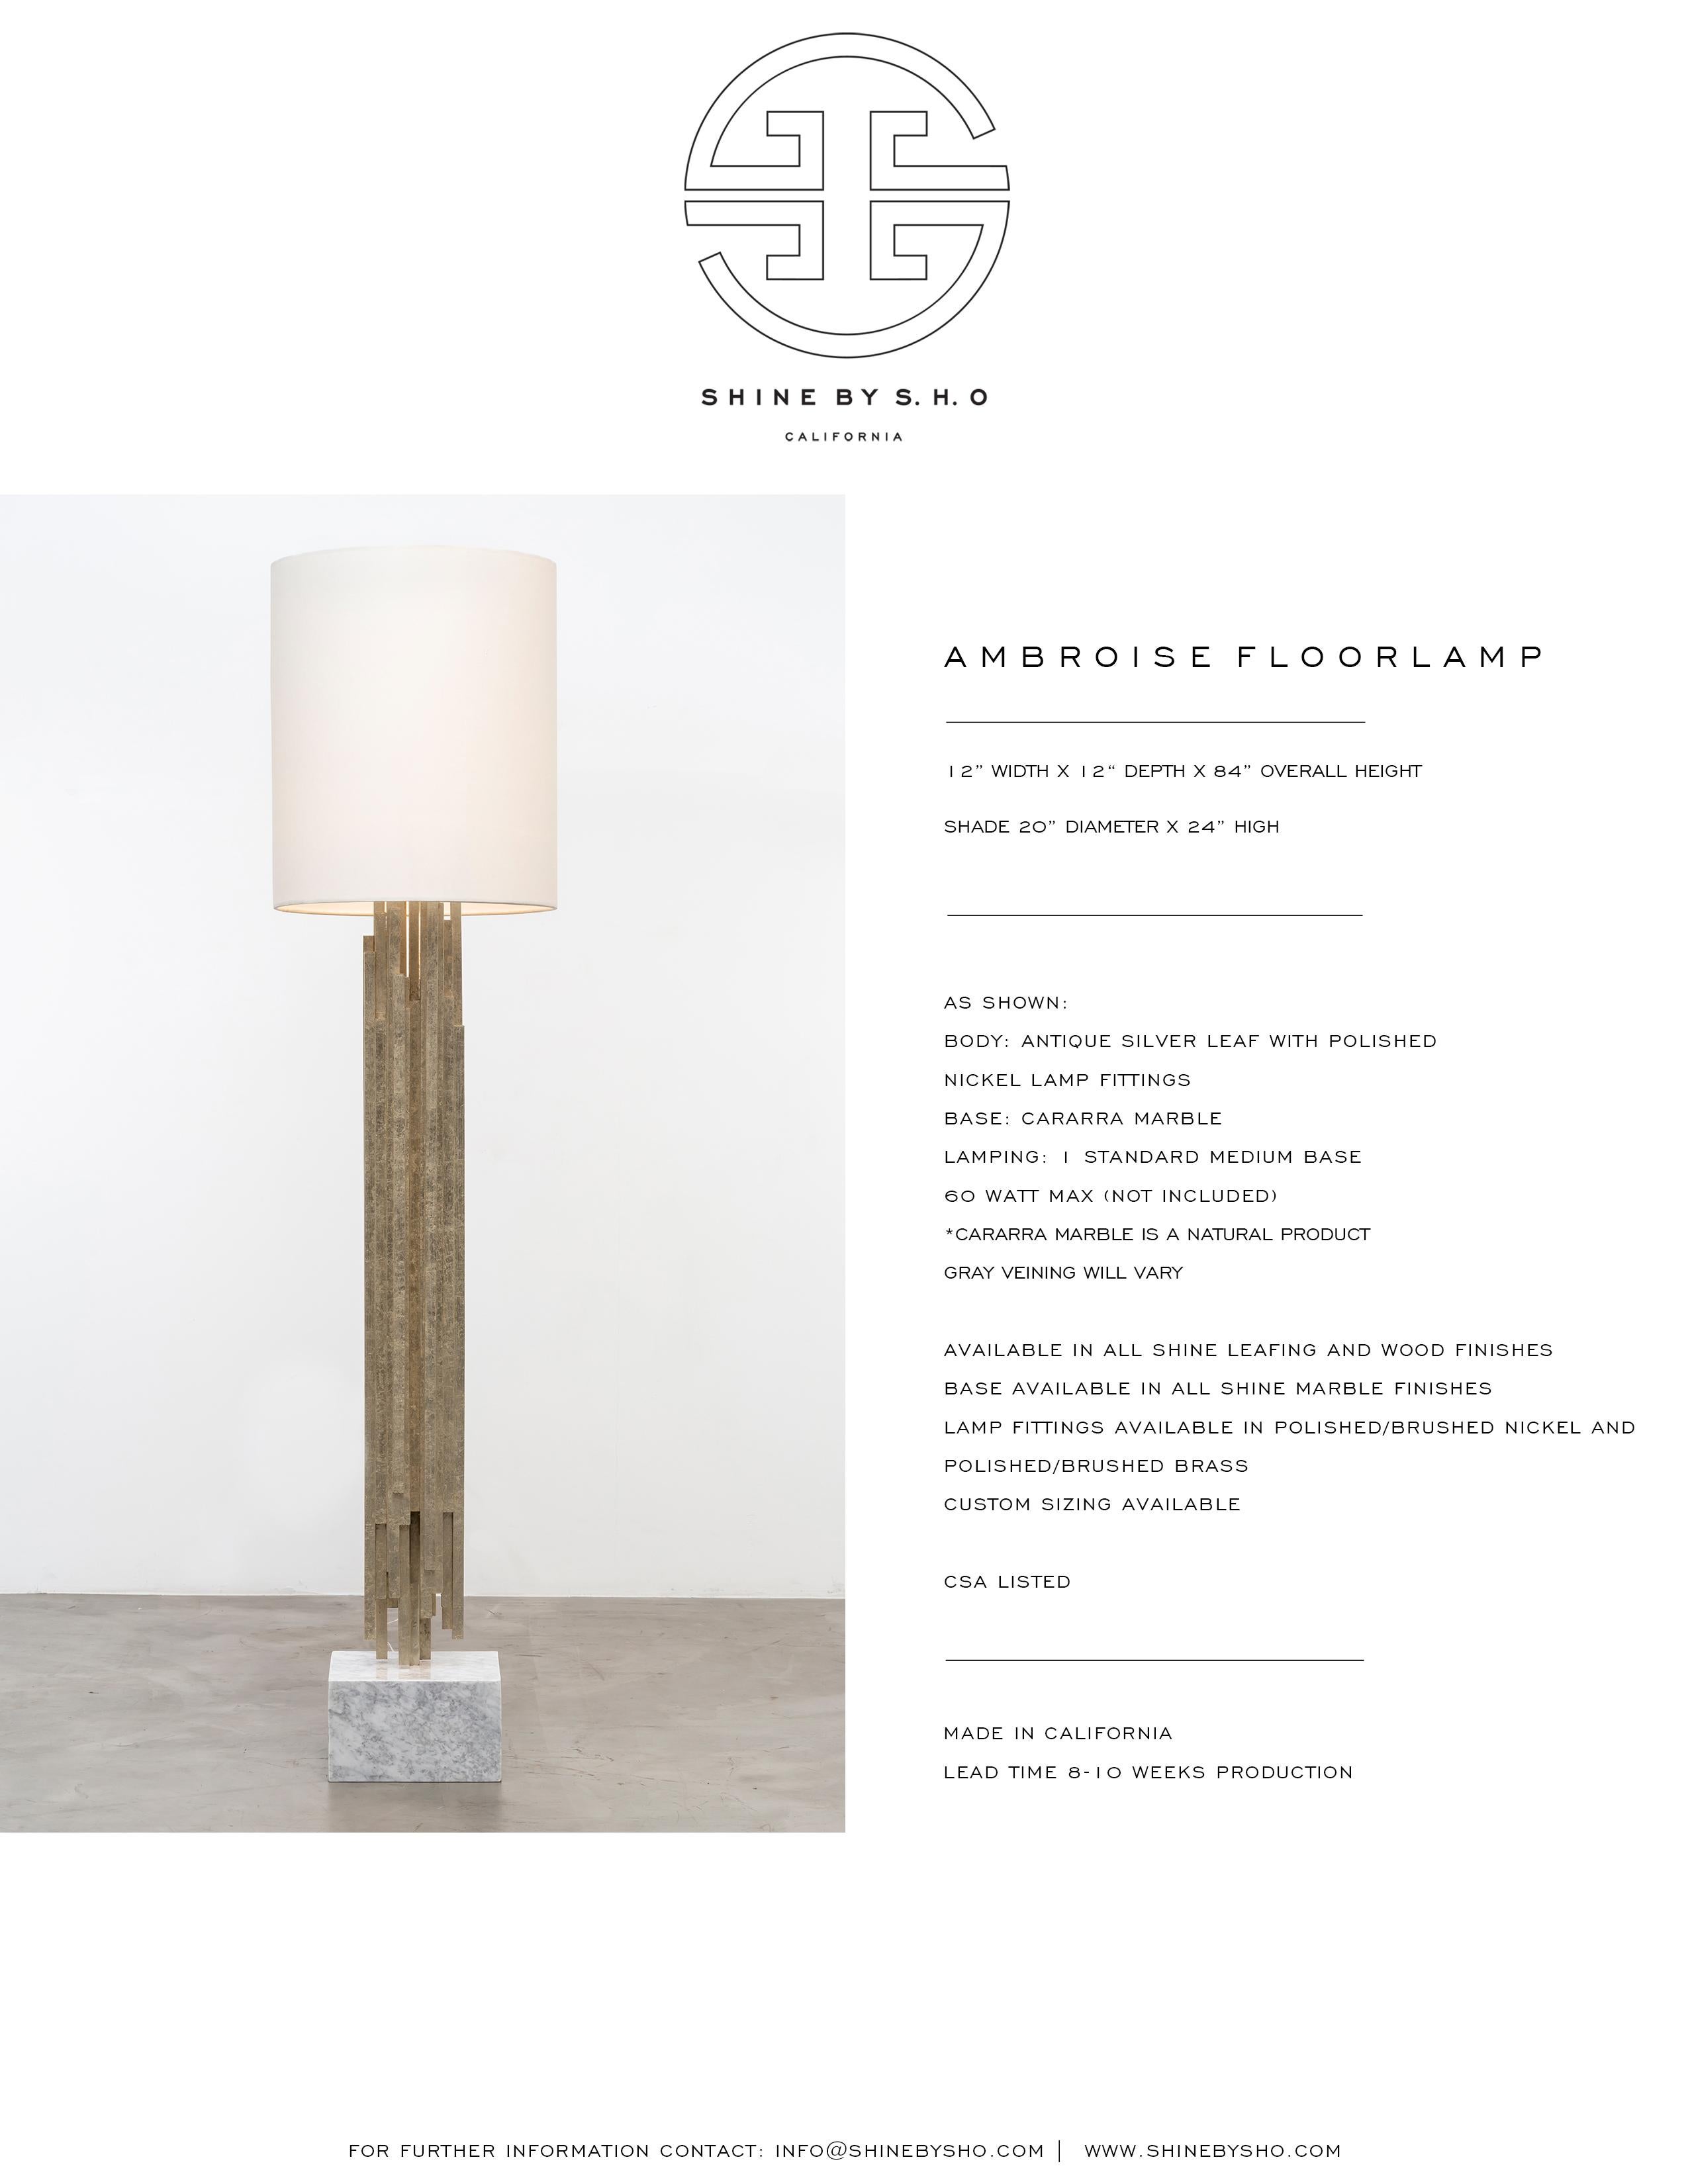 AMBROISE FLOORLAMP - Modern Gold Leaf Floorlamp with Carrara Marble Base In New Condition For Sale In Laguna Niguel, CA